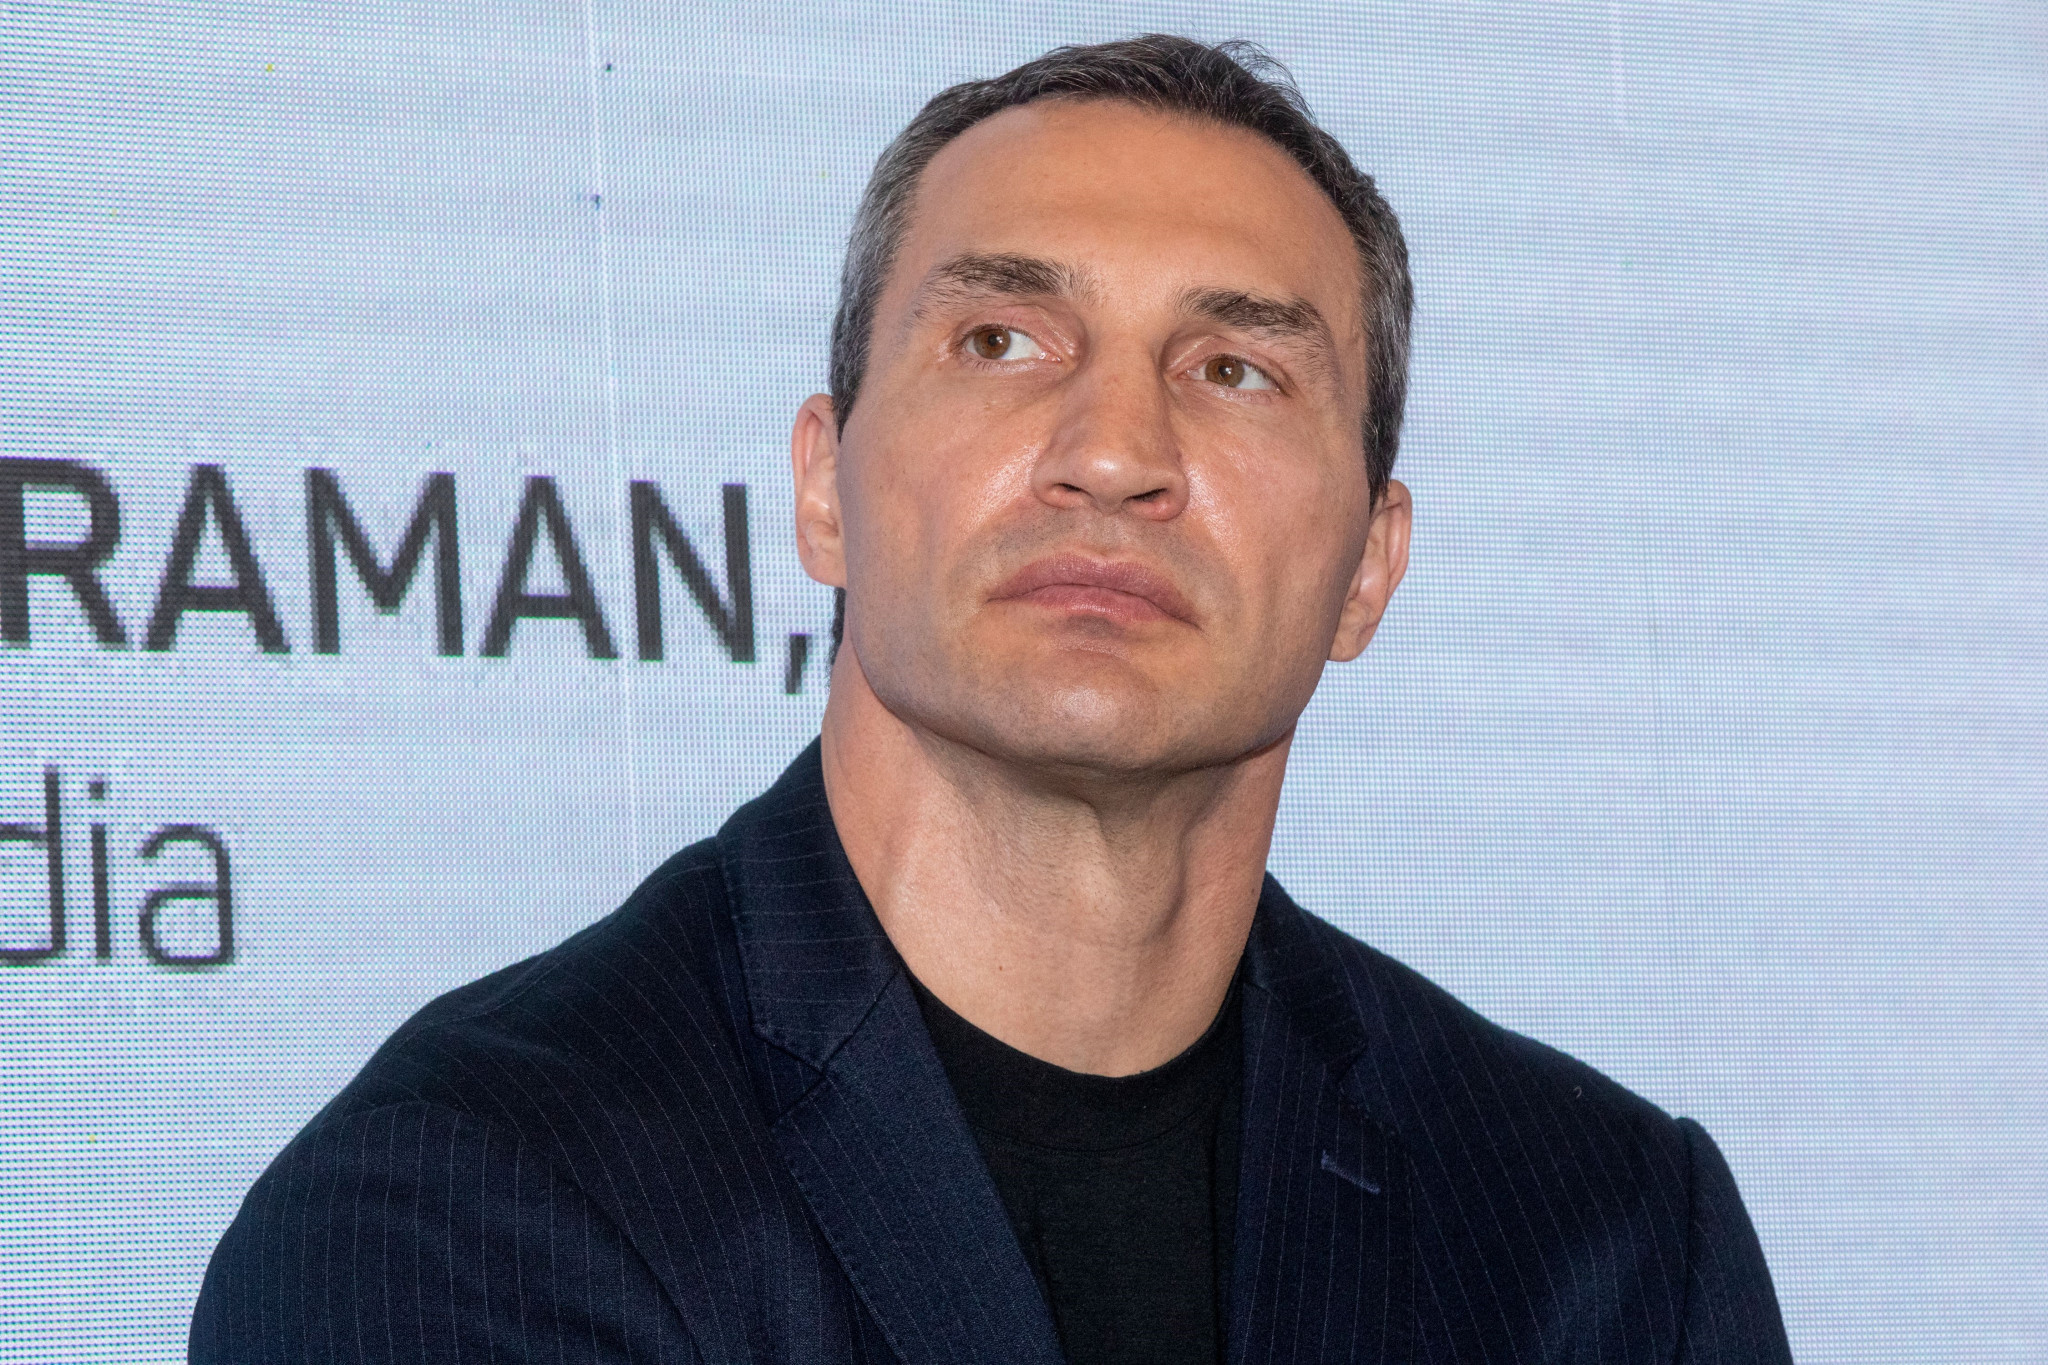 Klitschko accuses Bach of representing Russian interests, rather than Olympic values